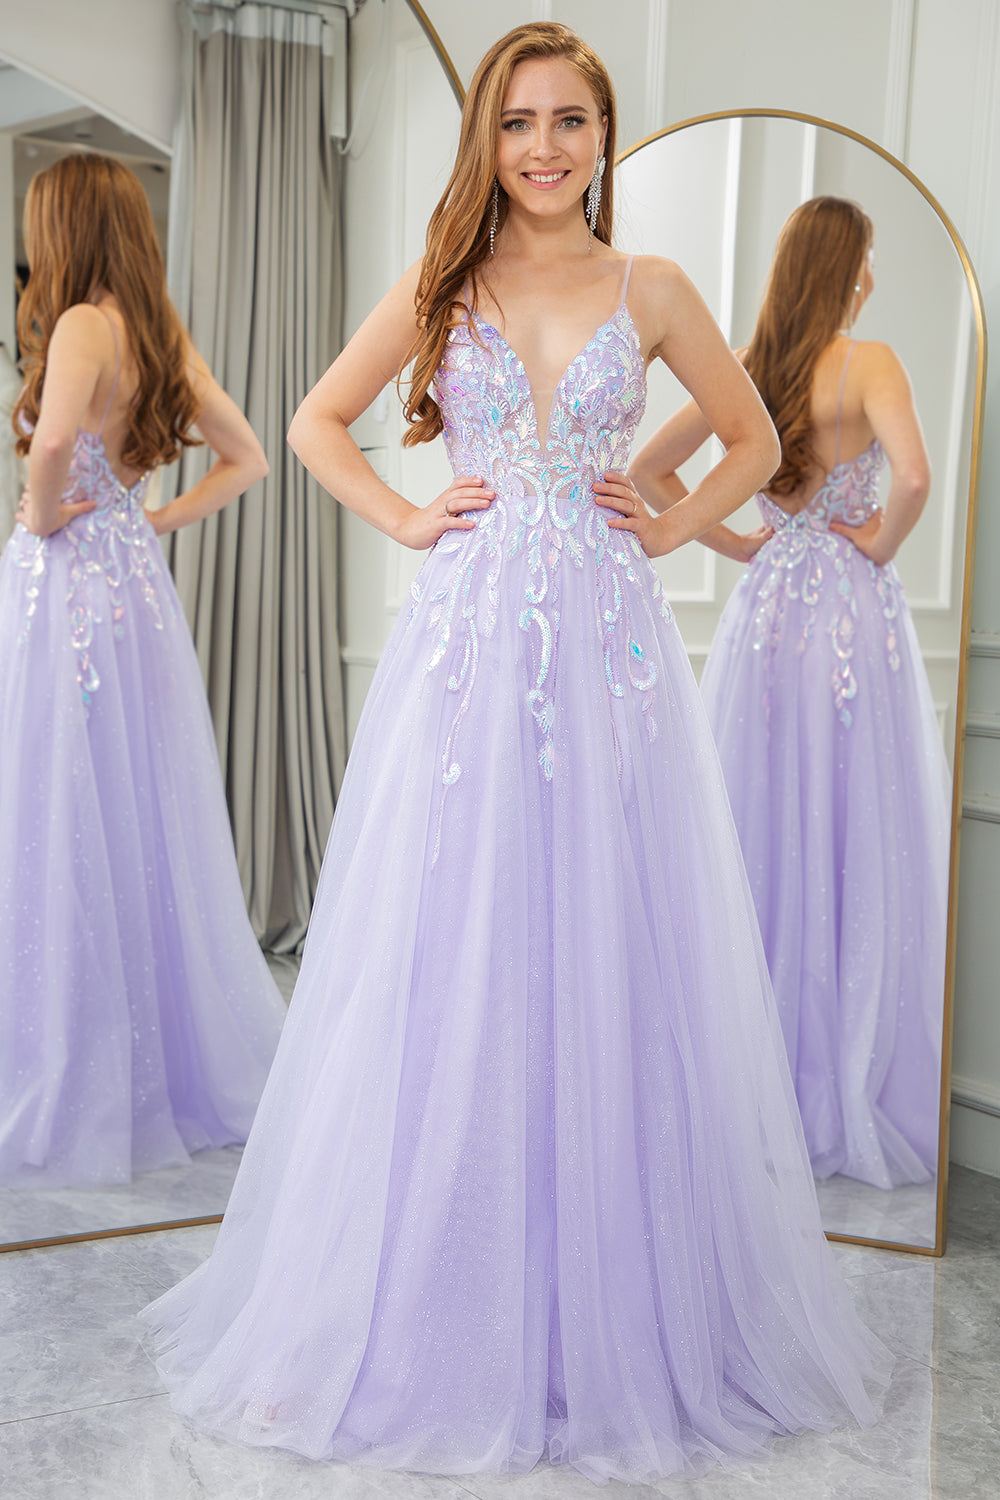 Wedtrend Women Sparkly Light Purple Corset Prom Dress with Slit